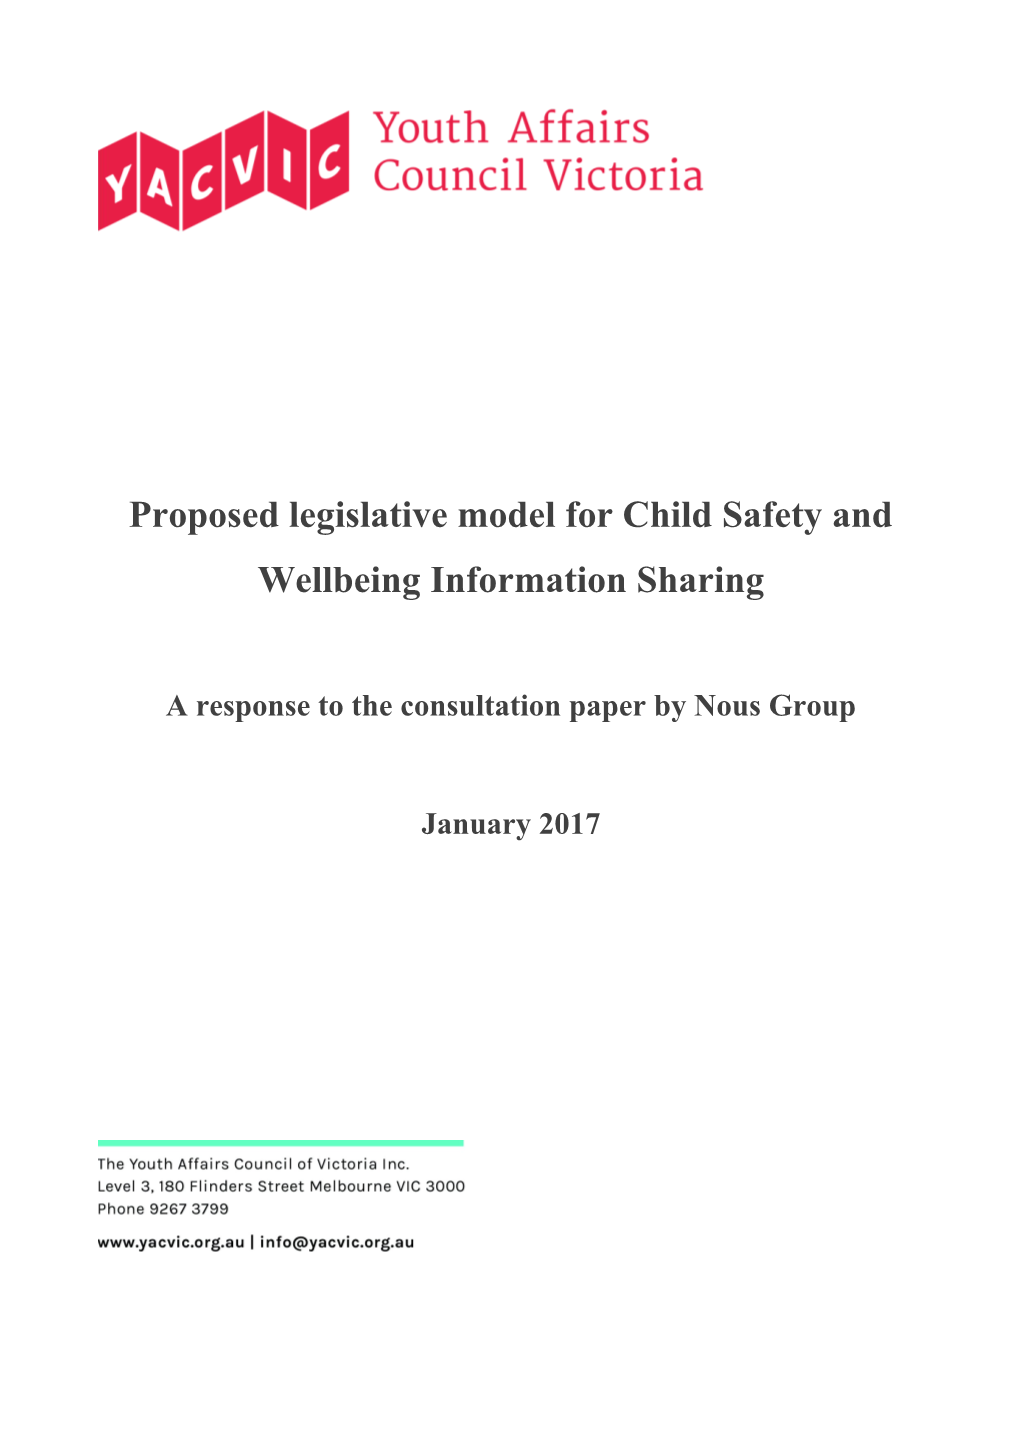 Proposed Legislative Model for Child Safety and Wellbeing Information Sharing